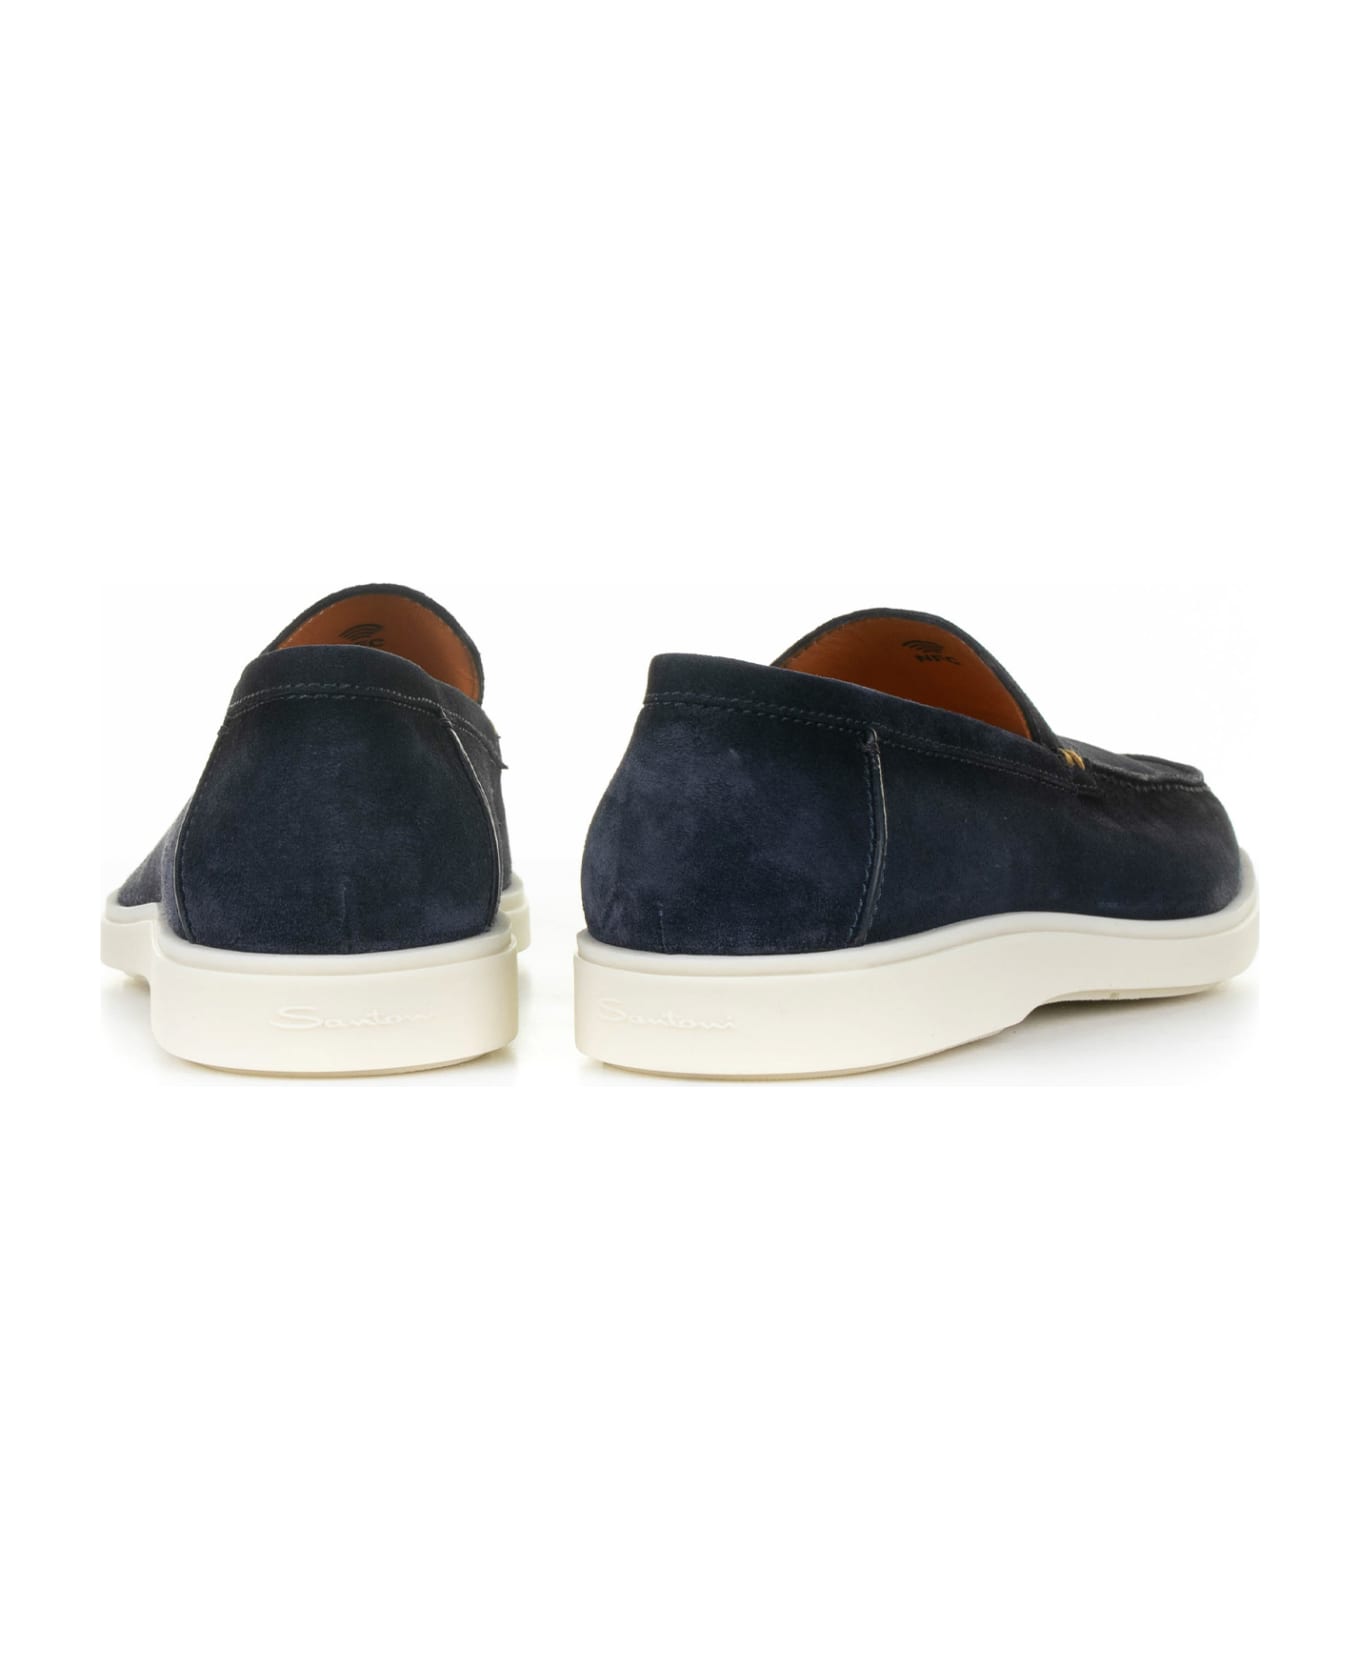 Santoni Moccasin In Blue Suede And Rubber Sole - BLUE